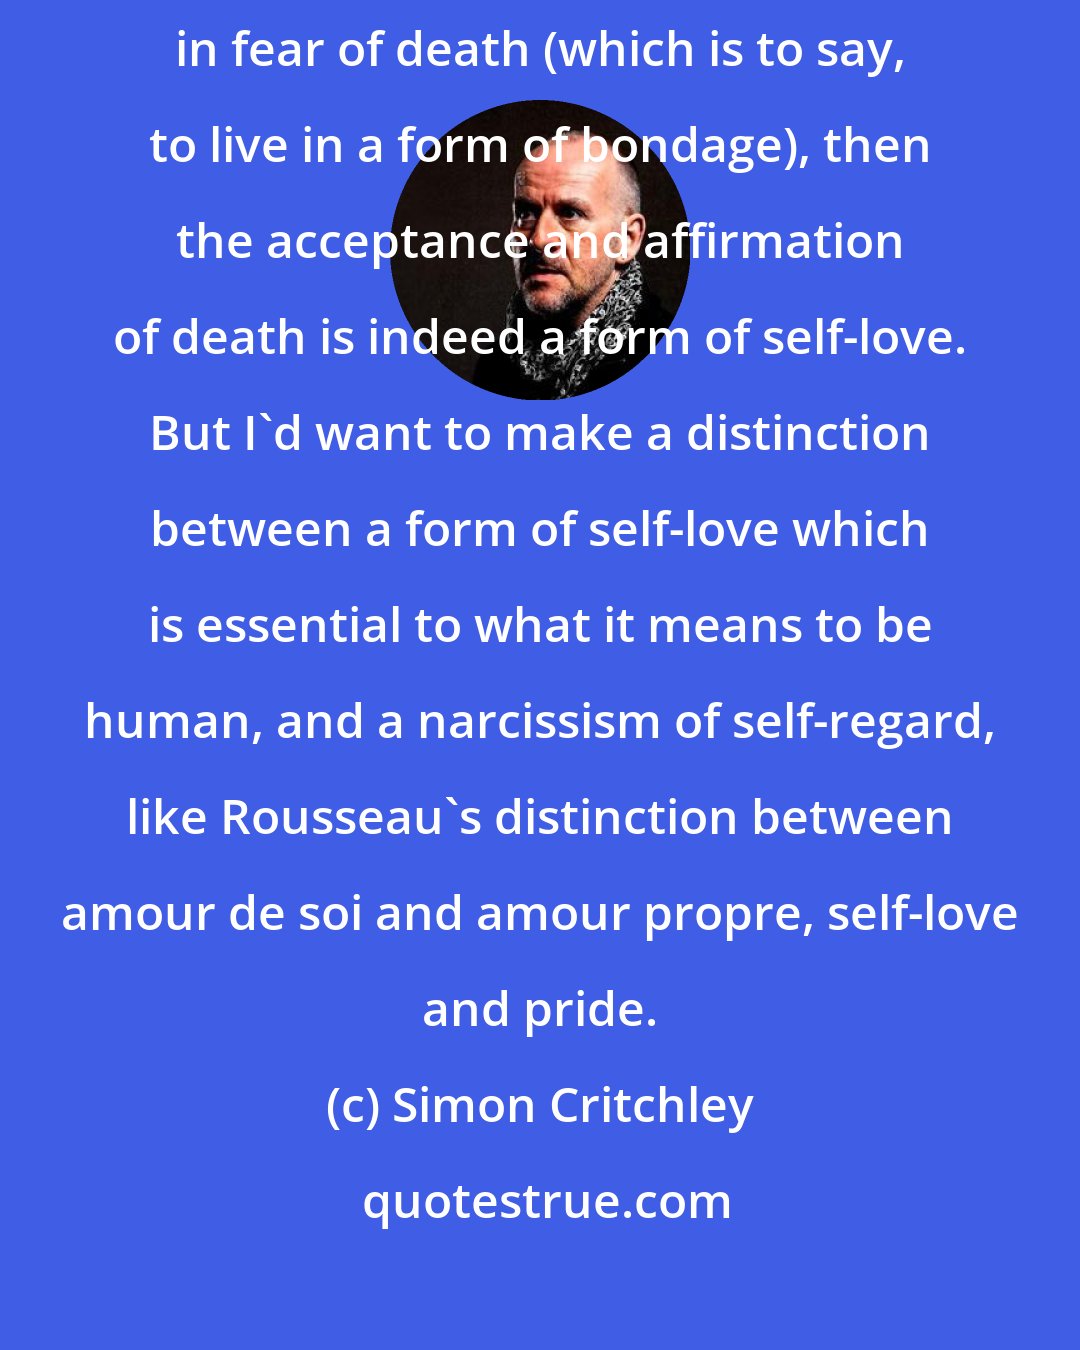 Simon Critchley: If the denial of death is self-hatred, as it is to deny our freedom and live in fear of death (which is to say, to live in a form of bondage), then the acceptance and affirmation of death is indeed a form of self-love. But I'd want to make a distinction between a form of self-love which is essential to what it means to be human, and a narcissism of self-regard, like Rousseau's distinction between amour de soi and amour propre, self-love and pride.